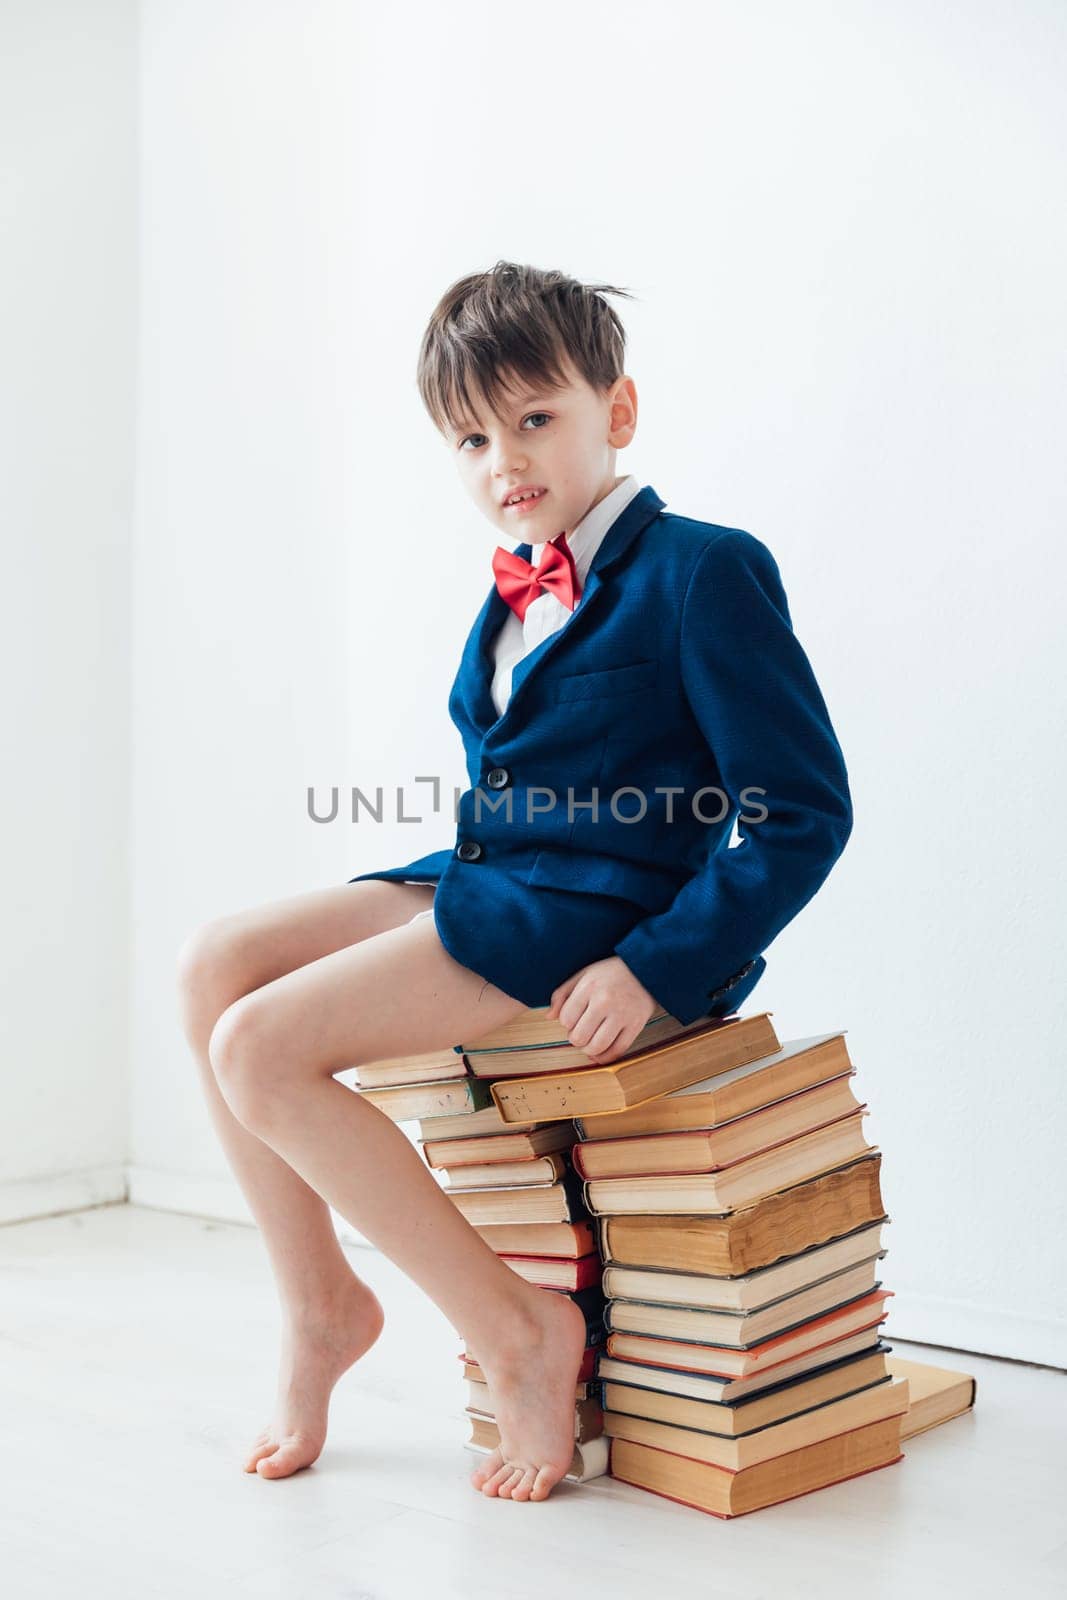 child sitting on books gets knowledge learning reading science by Simakov